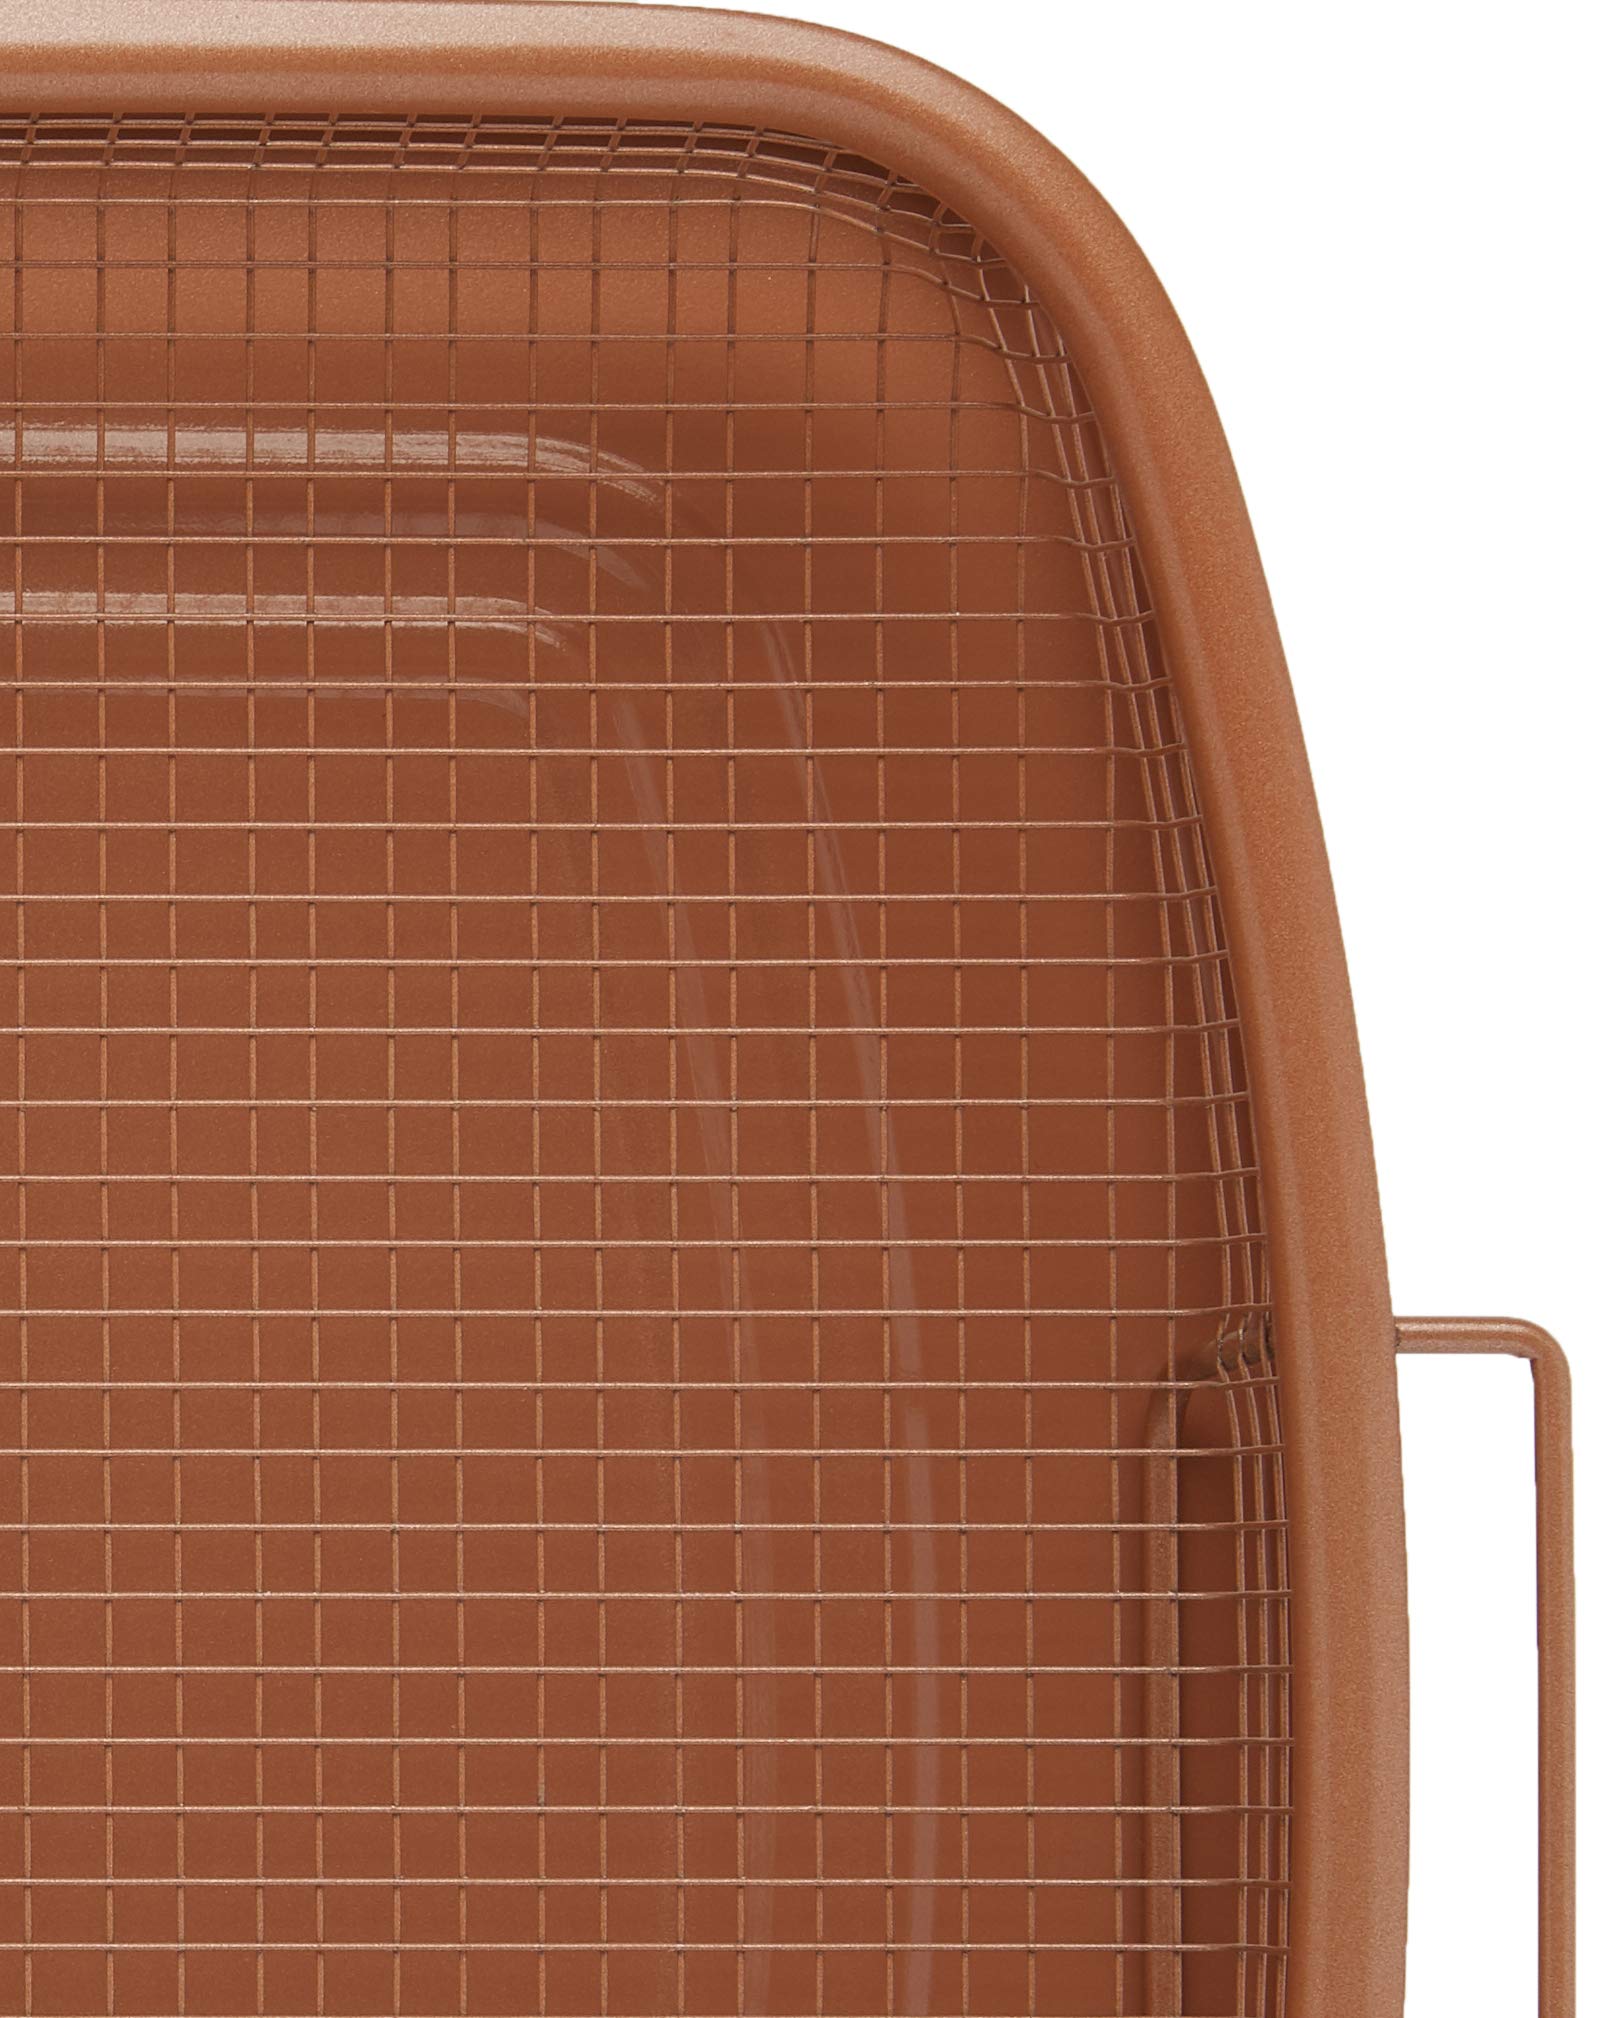 Gotham Steel Air Fryer Basket for Convection Oven, 2 Piece Nonstick Copper Crisper Tray, Also Great for Baking & Crispy Foods, Dishwasher Safe – XXL 16.5” x 12.5”